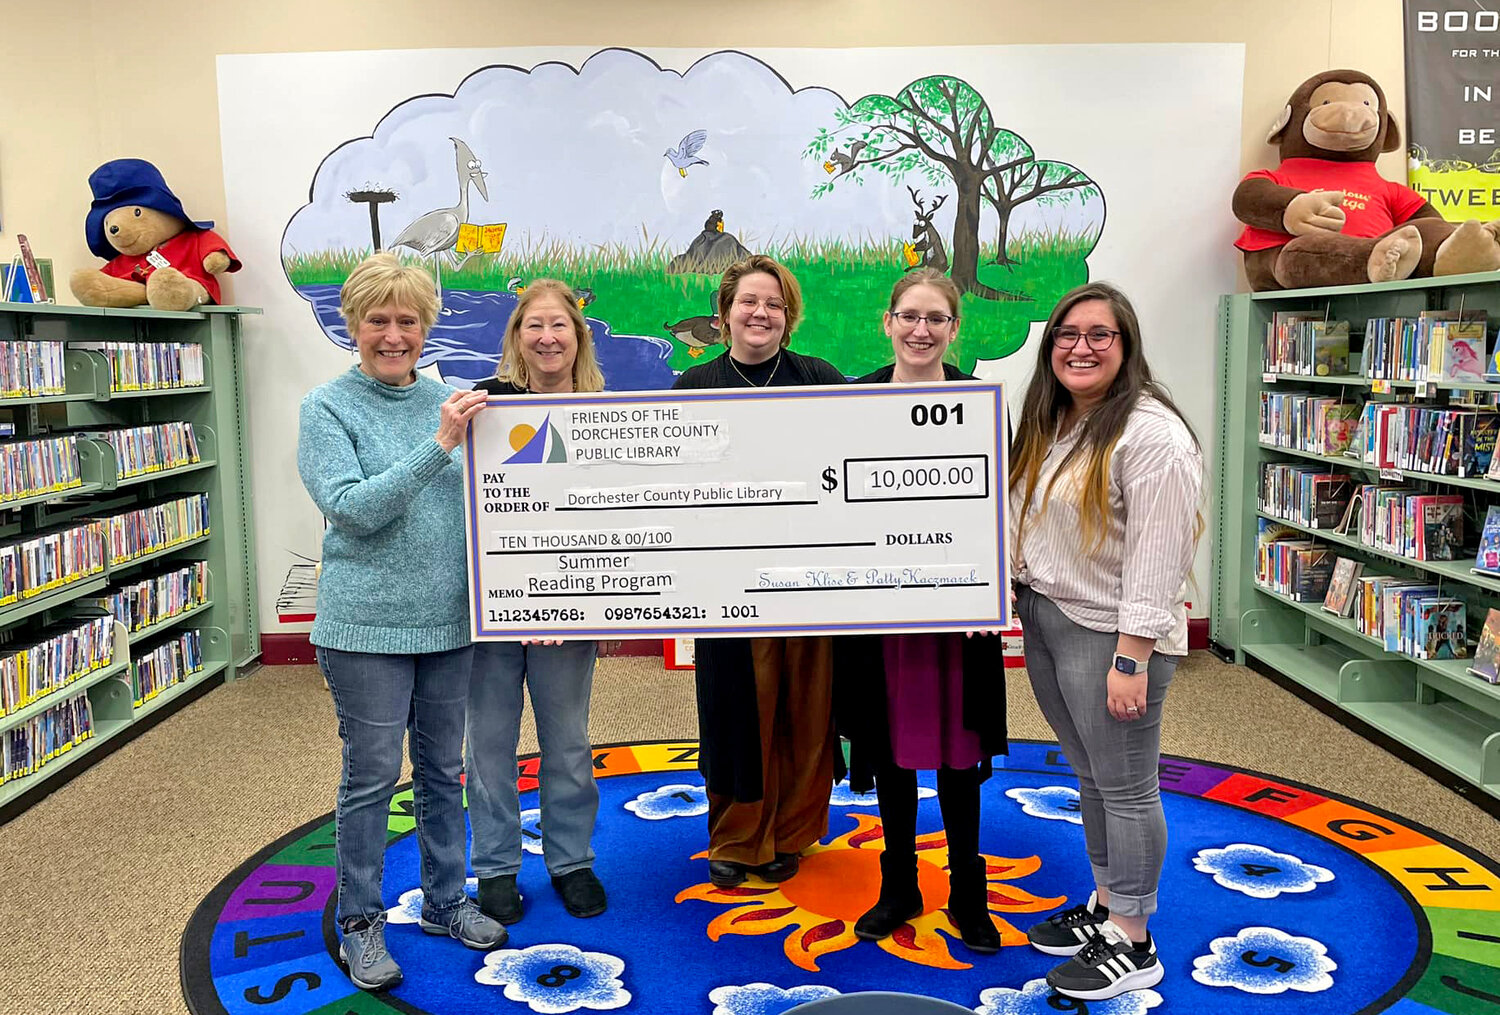 On Jan. 23, the Friends of the Library made their annual donation to the Dorchester Library. Pictured here in the children’s section of the Cambridge branch from left to right are Susan Klise and Patty Kaczmarek of the Friends and Maya Rogowski, Julie Kennedy and Liana Sewell, library staff. The funds donated were raised through the Friends’ Second Saturday book sales, memberships, and donations. To give to the Library, and/or the Friends, go to Dorchesterlibrary.org/support. All donations are tax deductible and support programming and collection enhancement at both branches of our Dorchester library. This year’s Friends’ donation is going towards the 2024 Summer Reading Program for the youth of Dorchester.